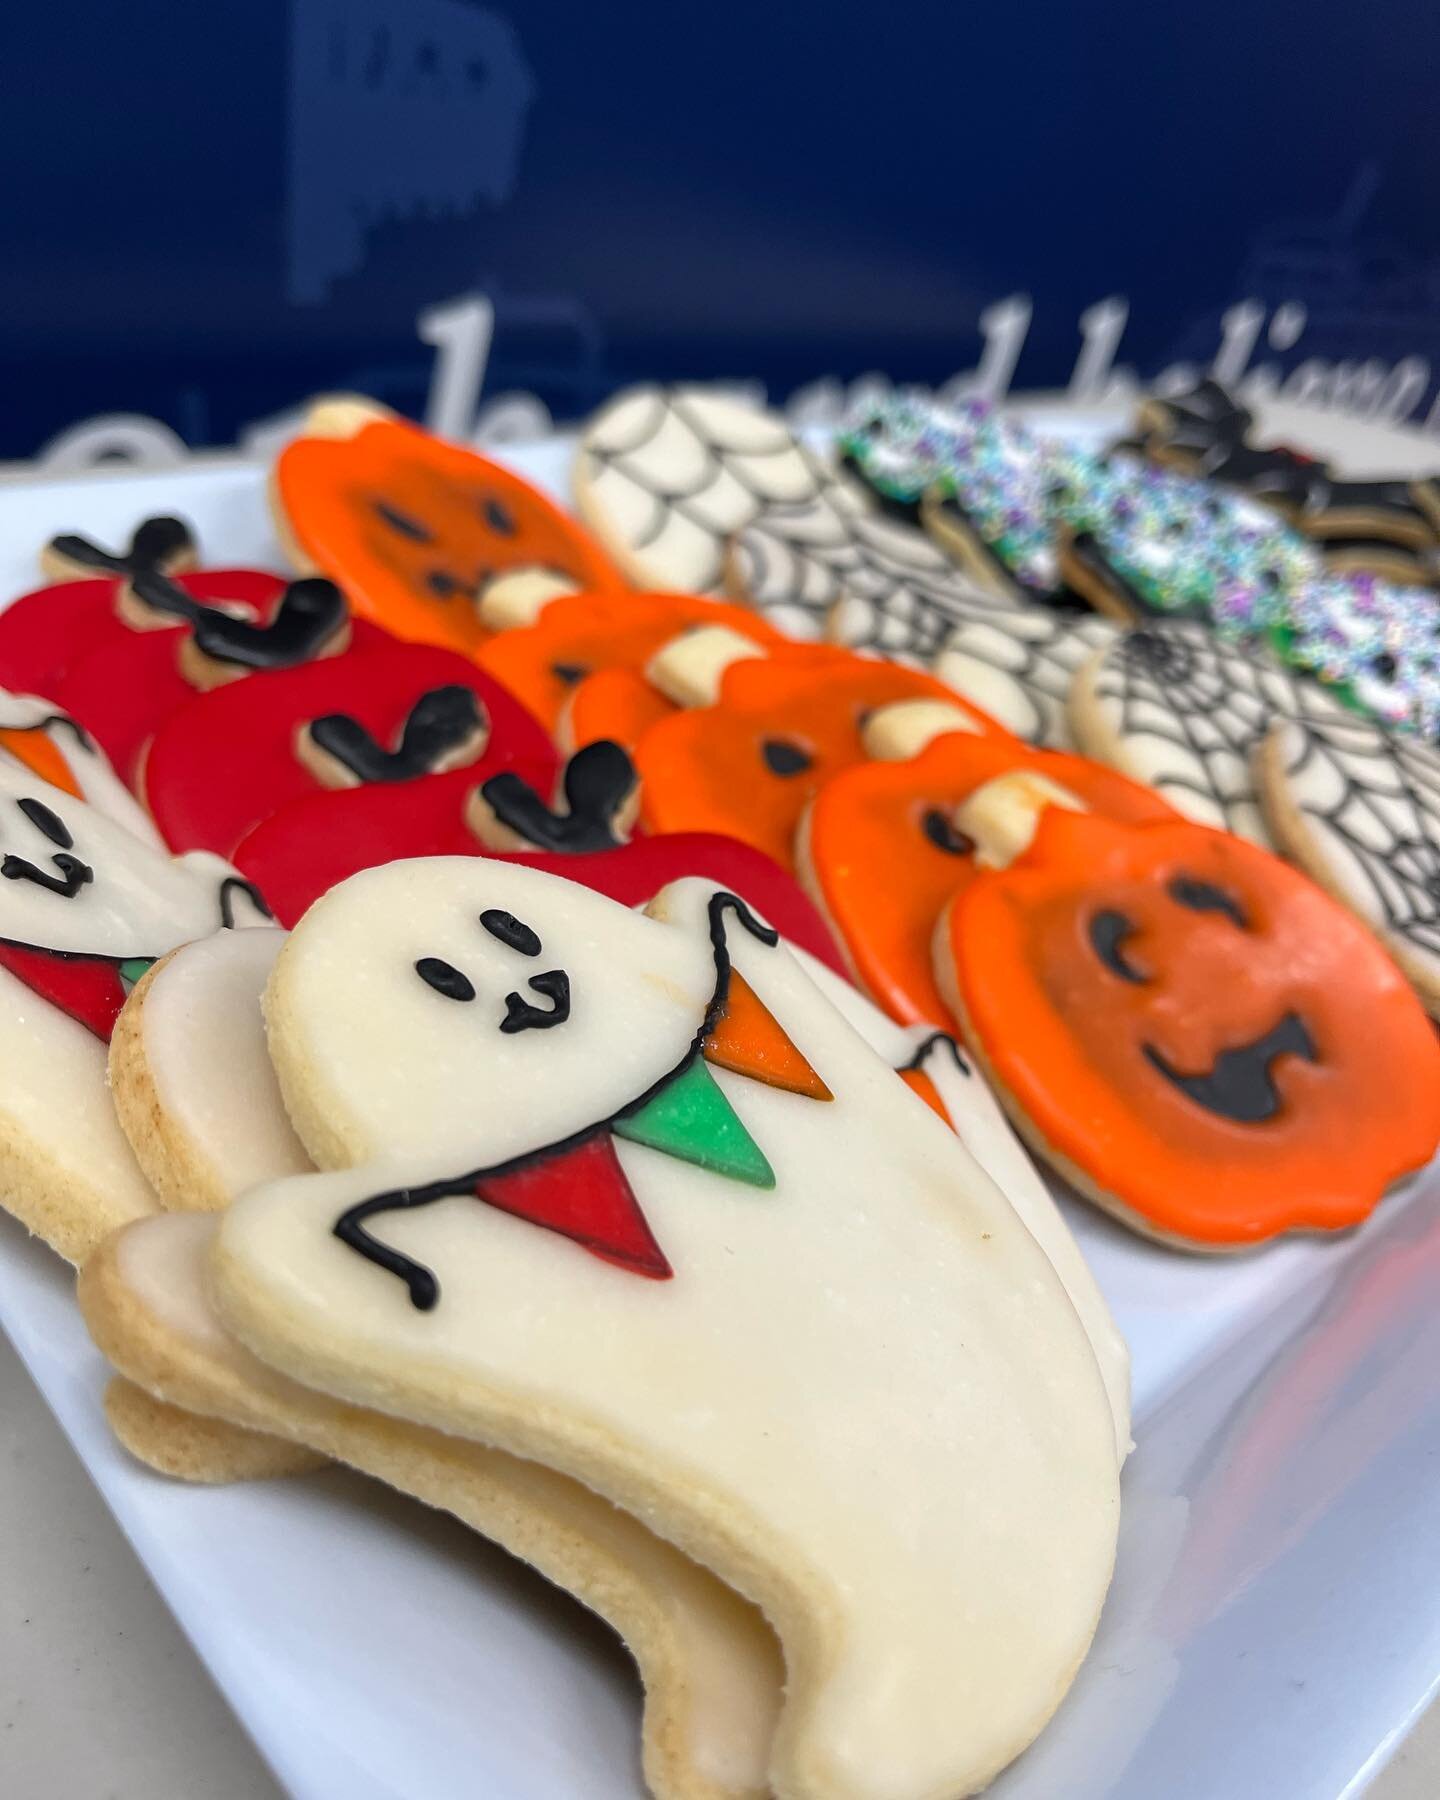 Happy Halloween from all of us at Fire-Pro. Celebrate safely and stay dry!

#halloweencostume #halloween #halloween2022 #vancouver #sugarcookies #sugarcookiesofinstagram #bc #firealarm #firesprinklersystem #firesprinkler #propertymanagement